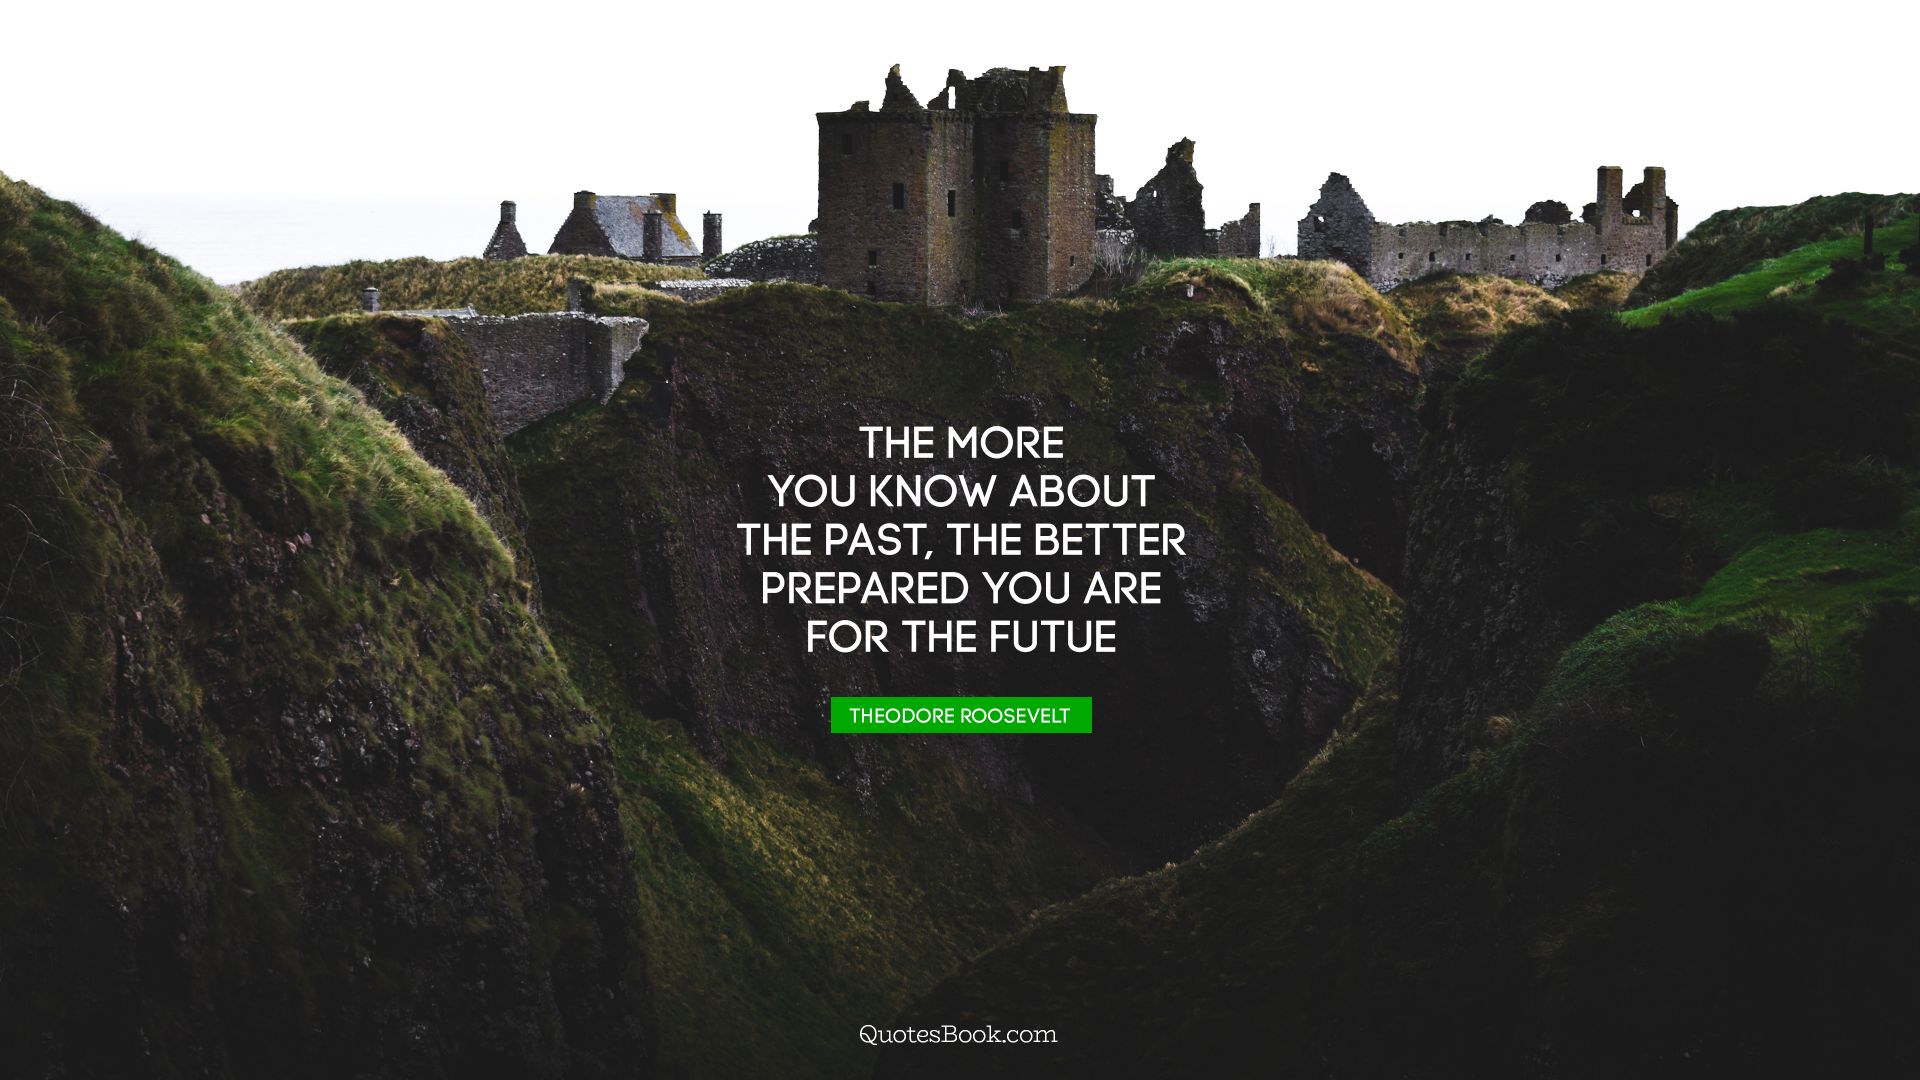 The more you know about the past, the better prepared you are for the futue. - Quote by Theodore Roosevelt